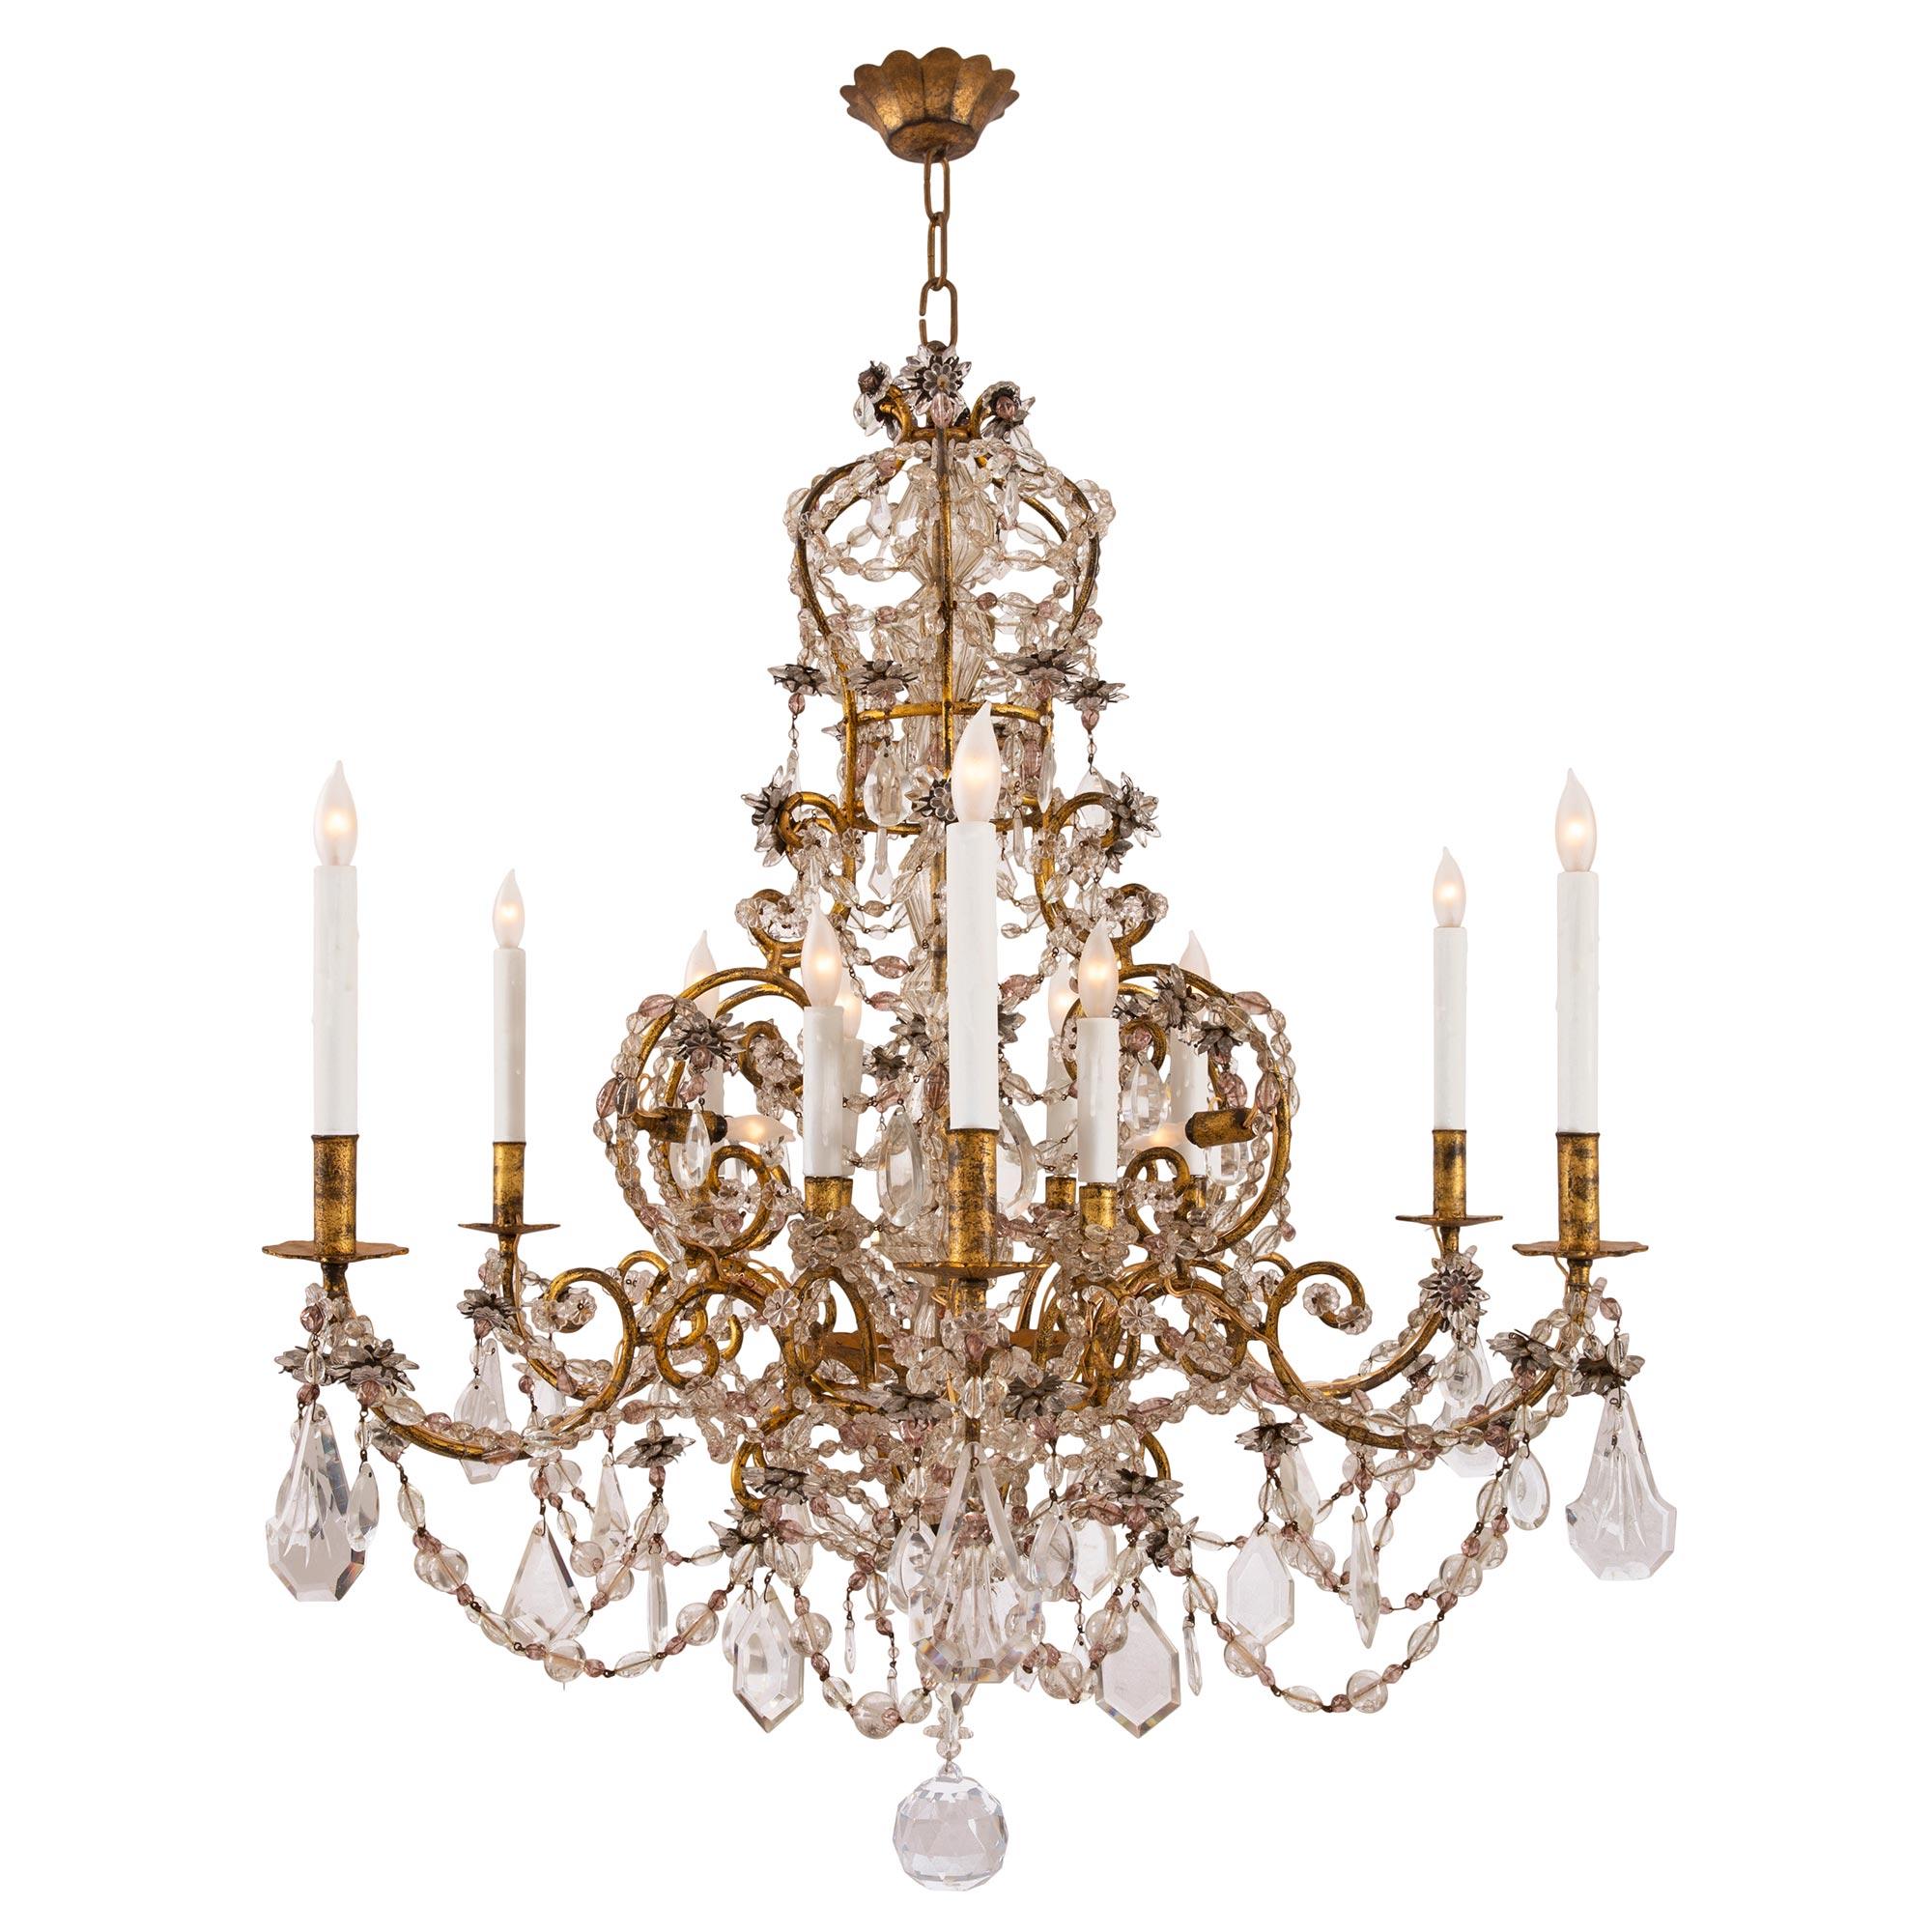 A beautiful and most decorative Italian 19th century Venetian st. gilt metal, crystal and glass chandelier. The twelve arm eighteen light chandelier is centered by an elegant solid cut crystal ball below a striking array of cut crystal pendants,